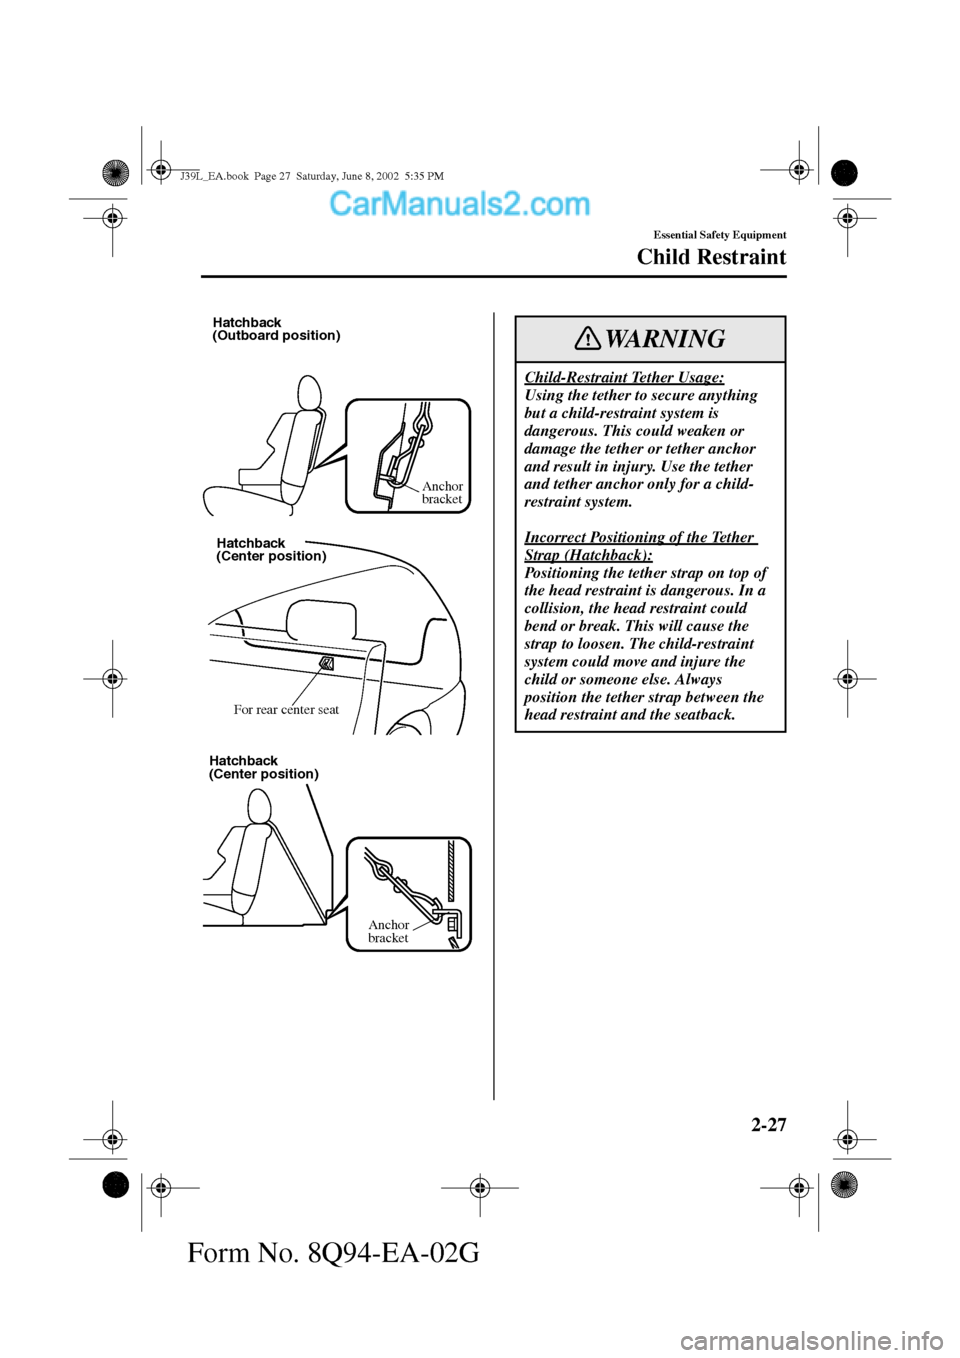 MAZDA MODEL PROTÉGÉ 2003   (in English) Owners Guide 2-27
Essential Safety Equipment
Child Restraint
Form No. 8Q94-EA-02G
Anchor
bracket Hatchback
(Outboard position)
Hatchback
(Center position)
For rear center seat
Anchor
bracket Hatchback
(Center posi